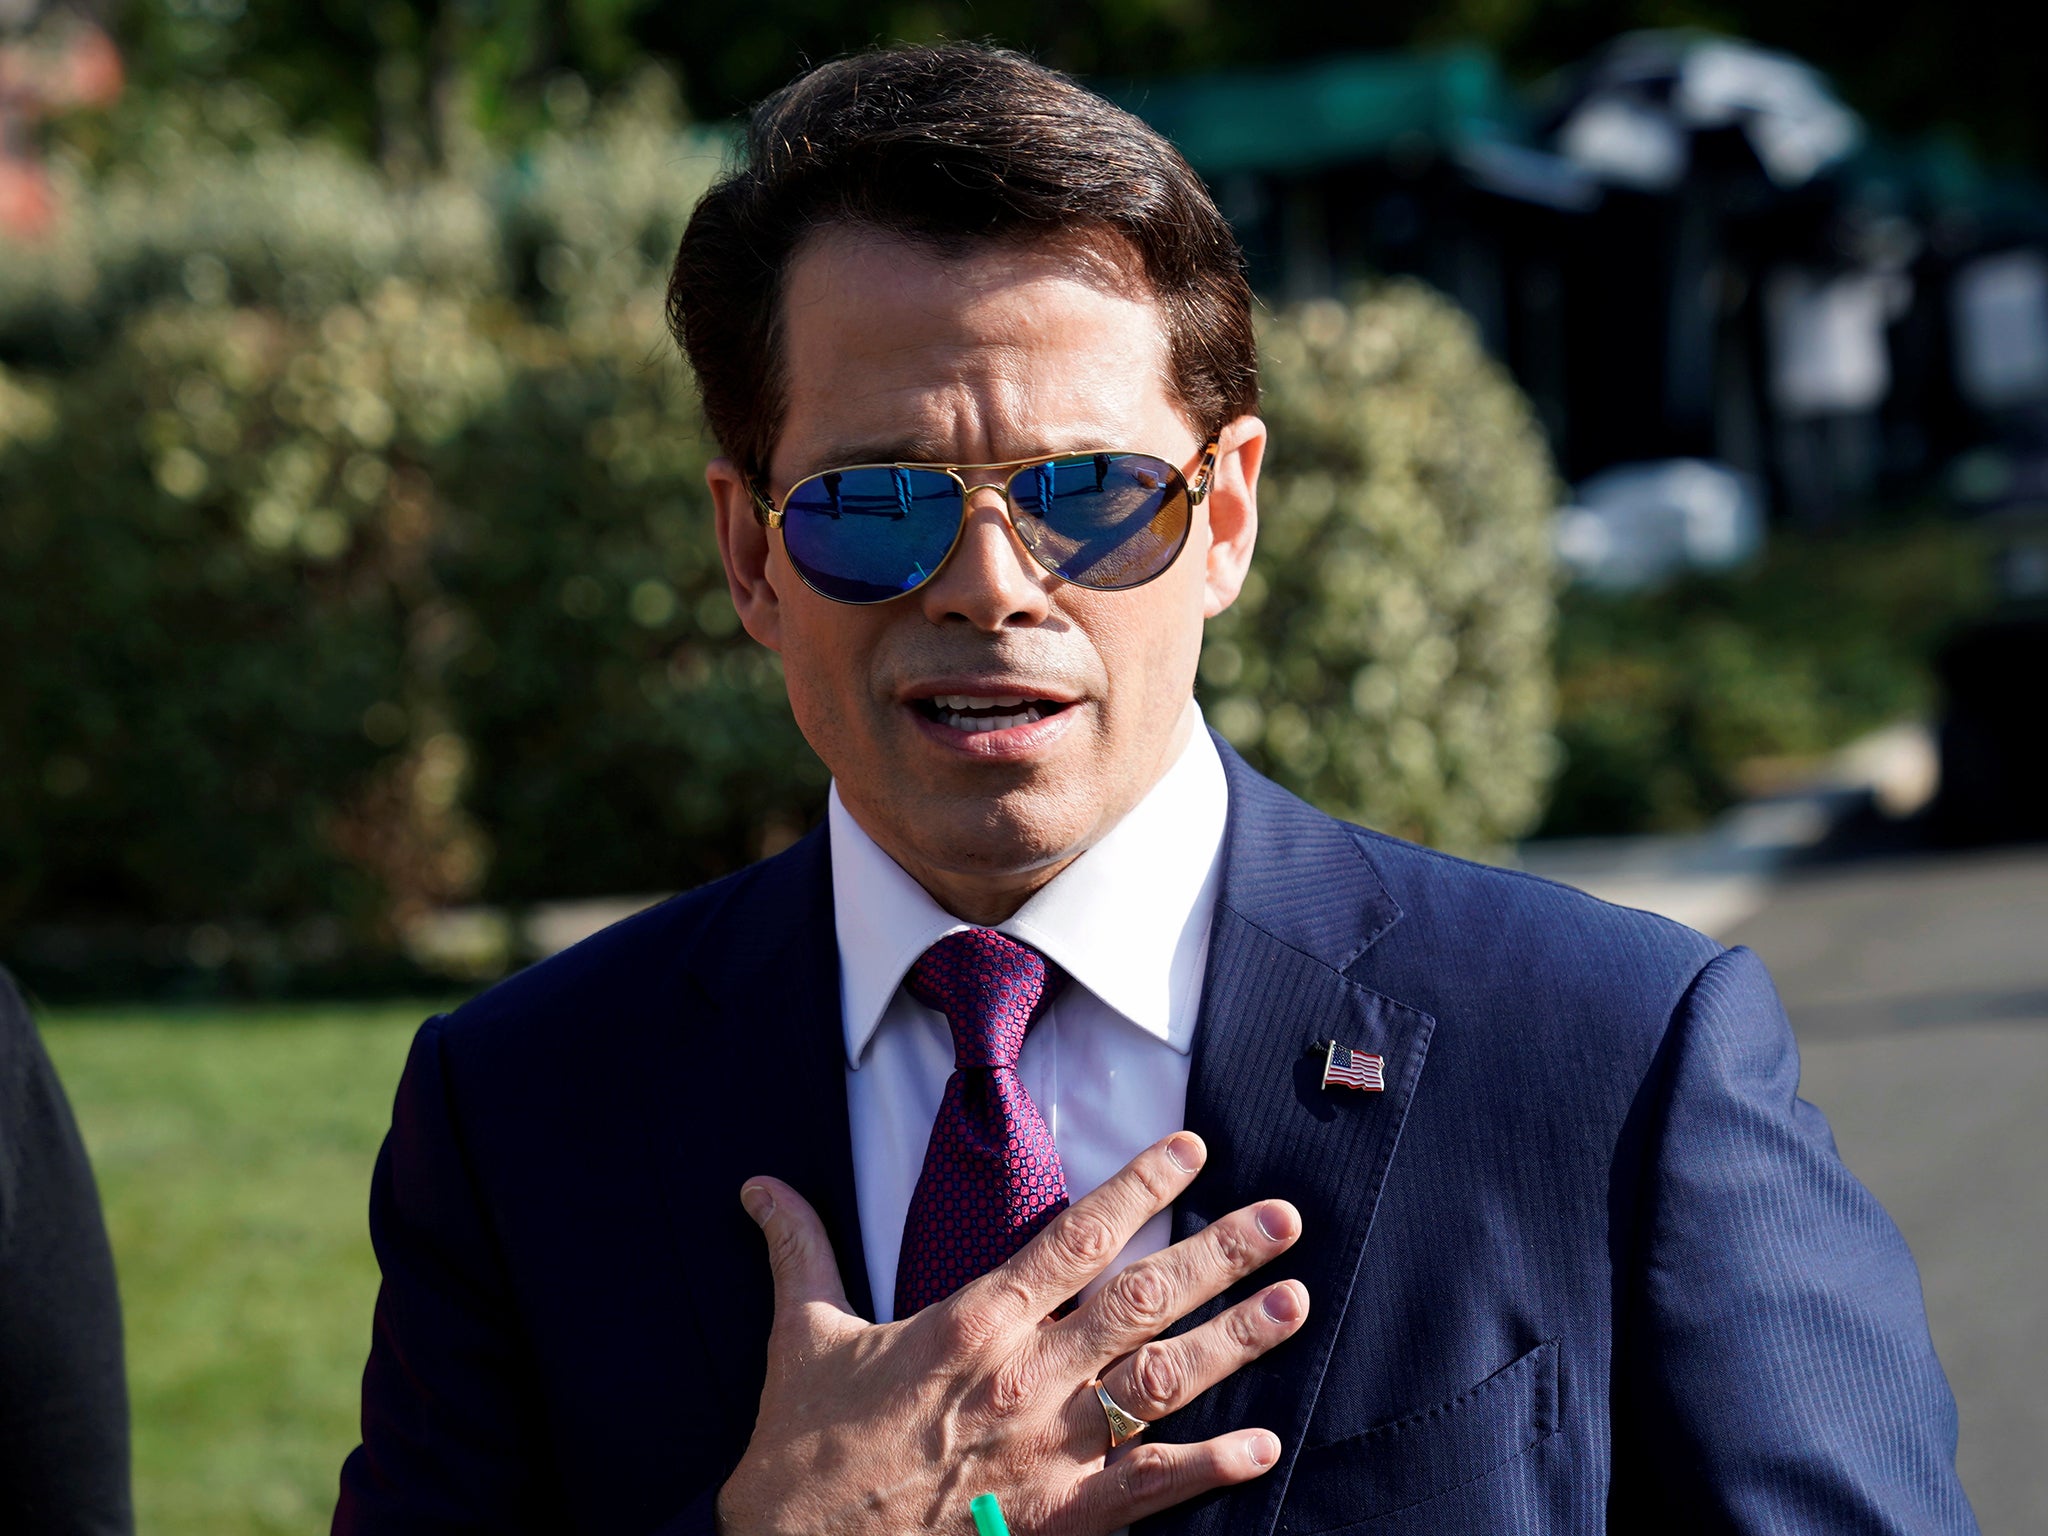 Did Scaramucci intend for his remarks to be reported?